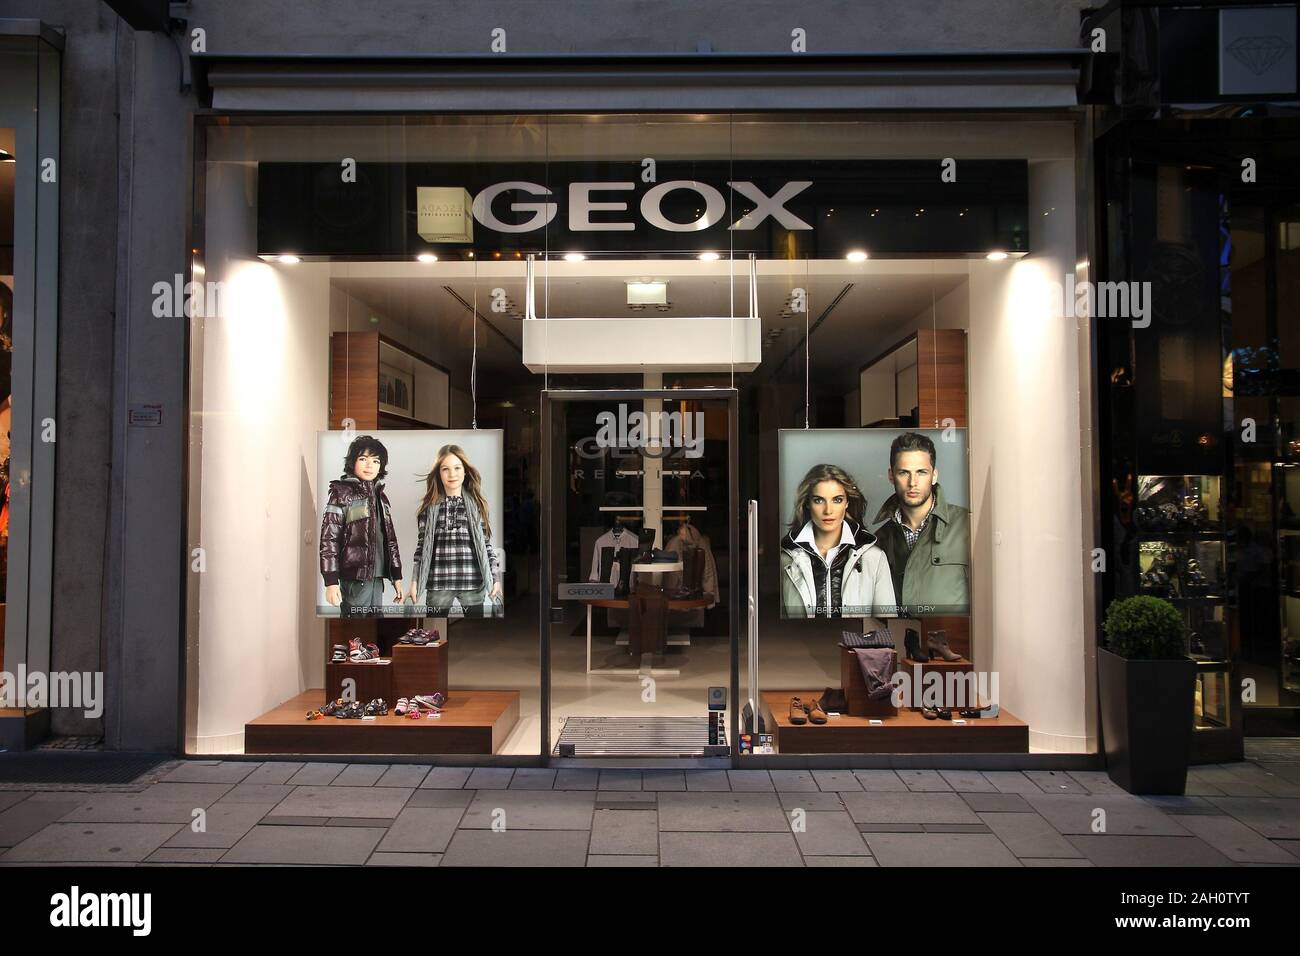 VIENNA - SEPTEMBER 4: Geox footwear store on September 4, 2011 in Vienna.  Geox is a successful Italian apparel company founded in 1995. It had 58m  EUR Stock Photo - Alamy